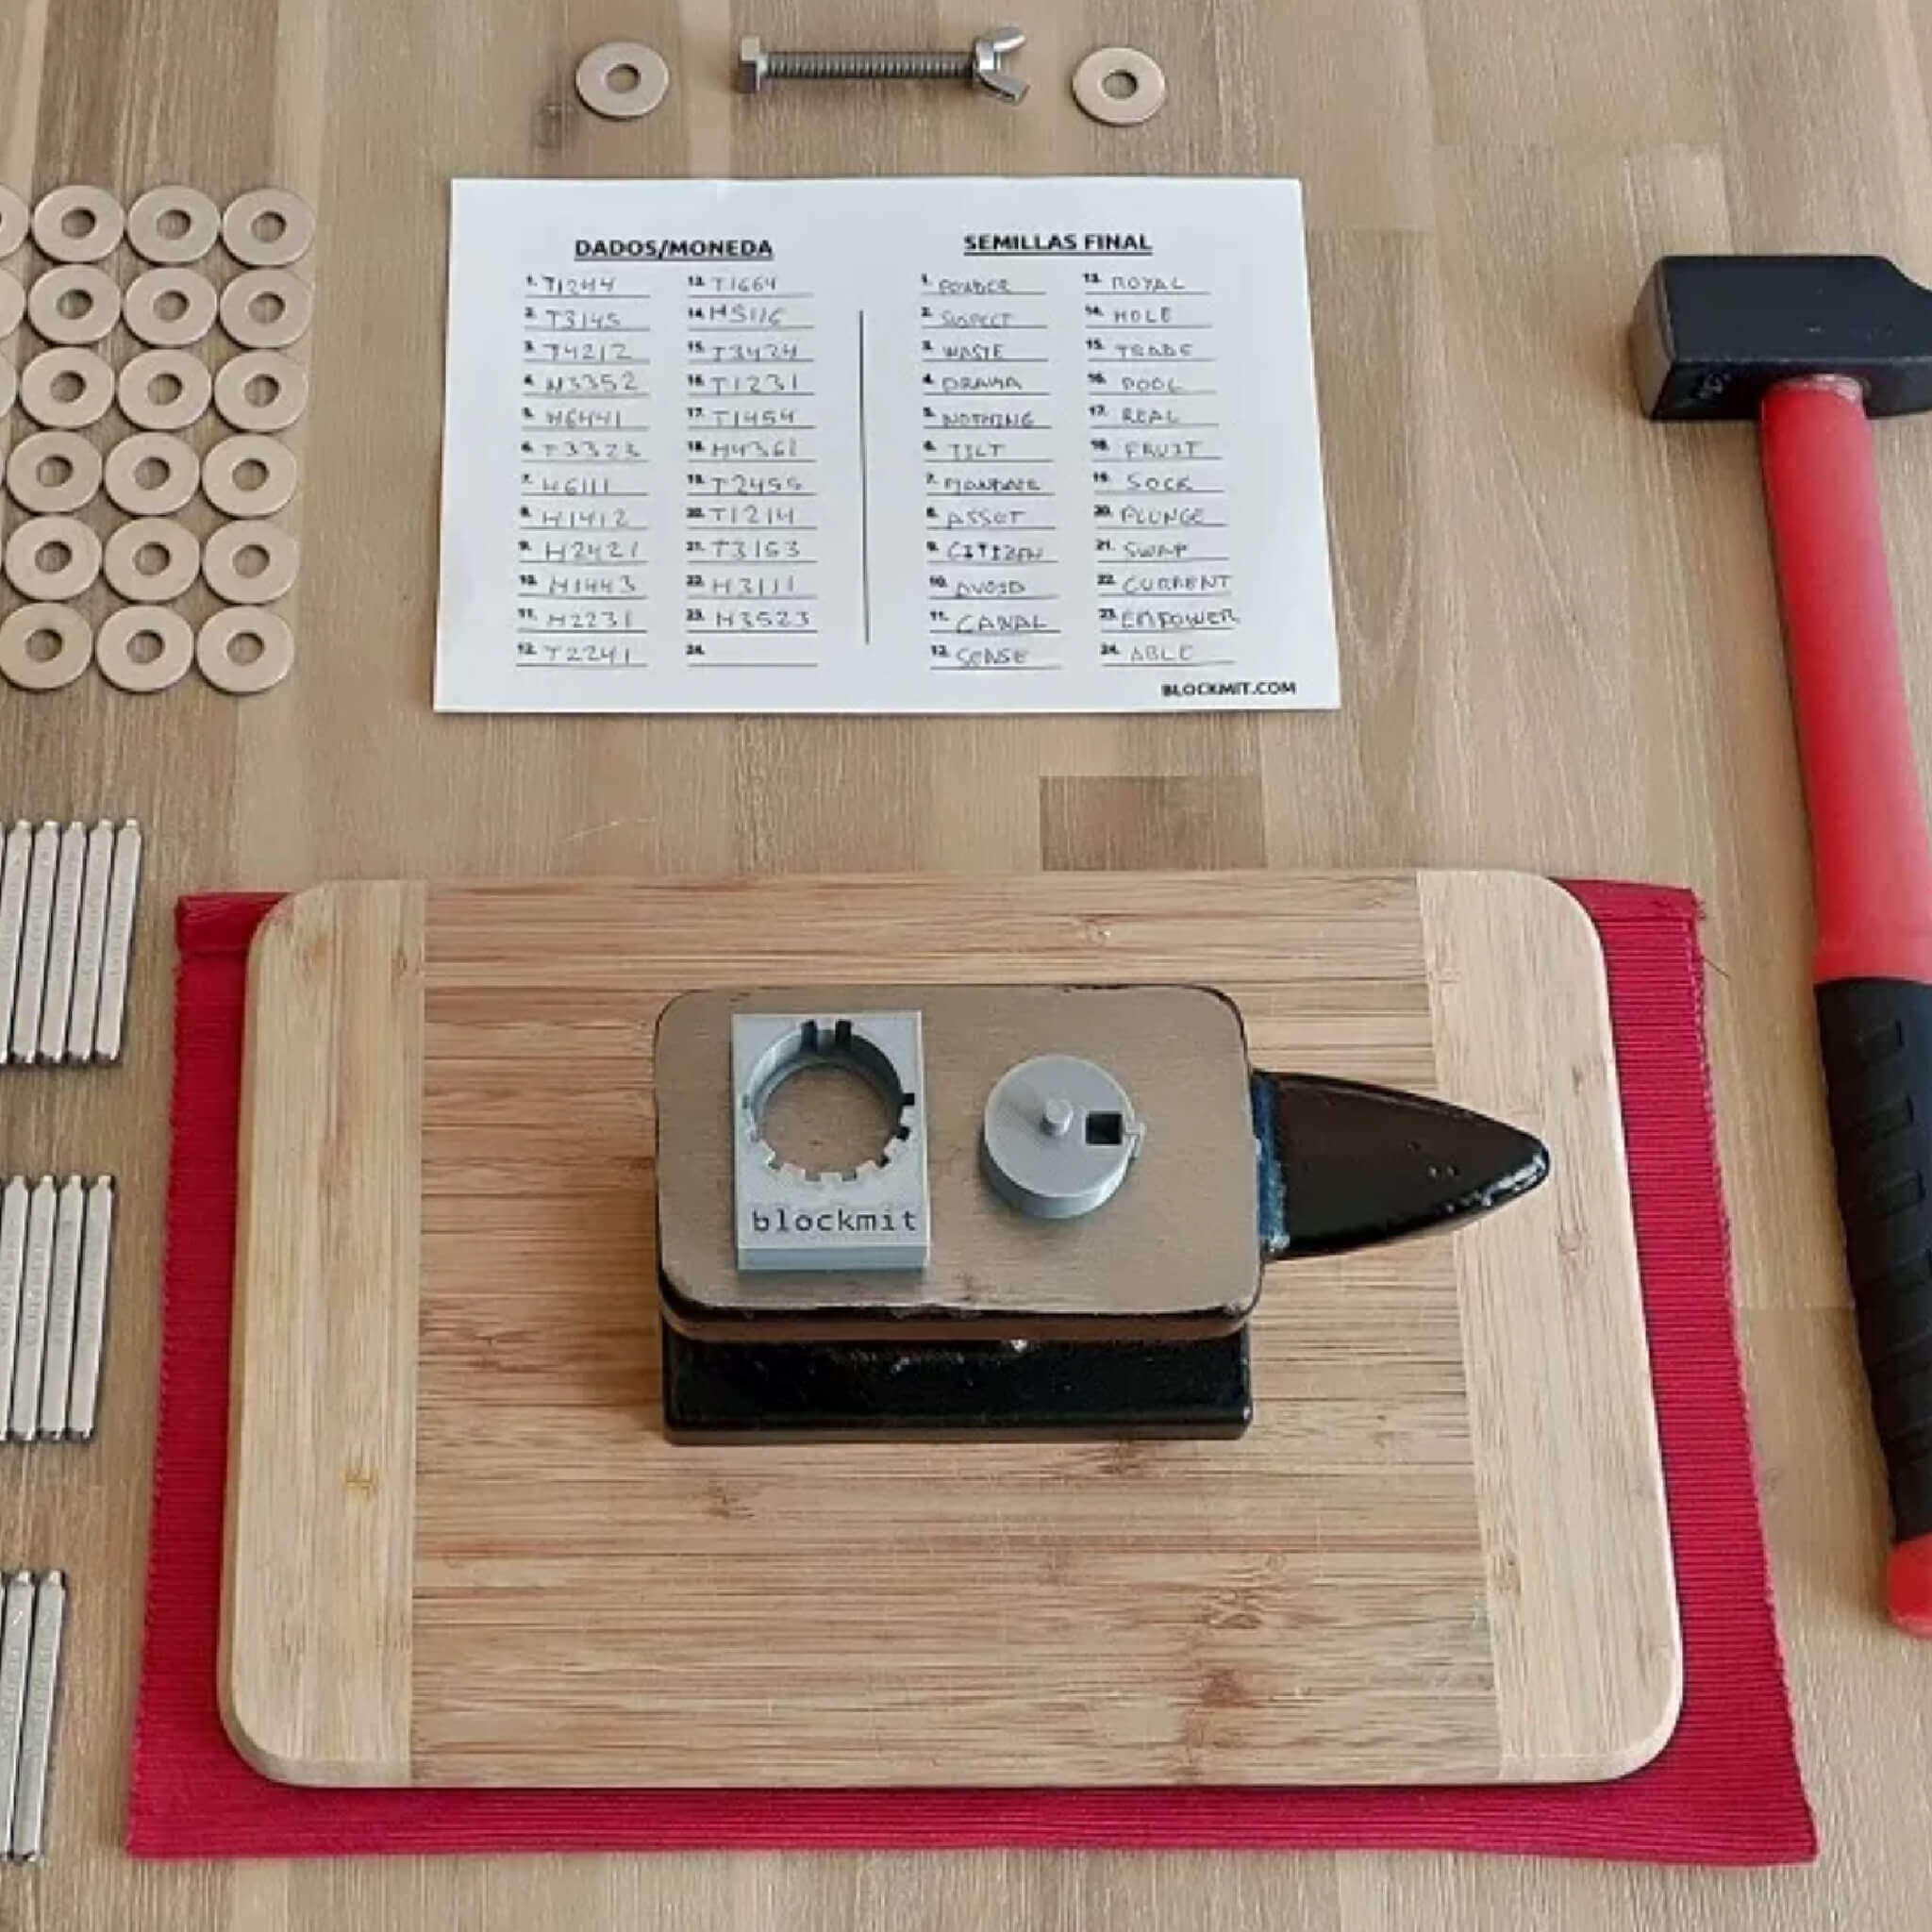 Cryptocloaks Blockmit Jig setup with washers, bolts, jig and Recovery Phrase  paper